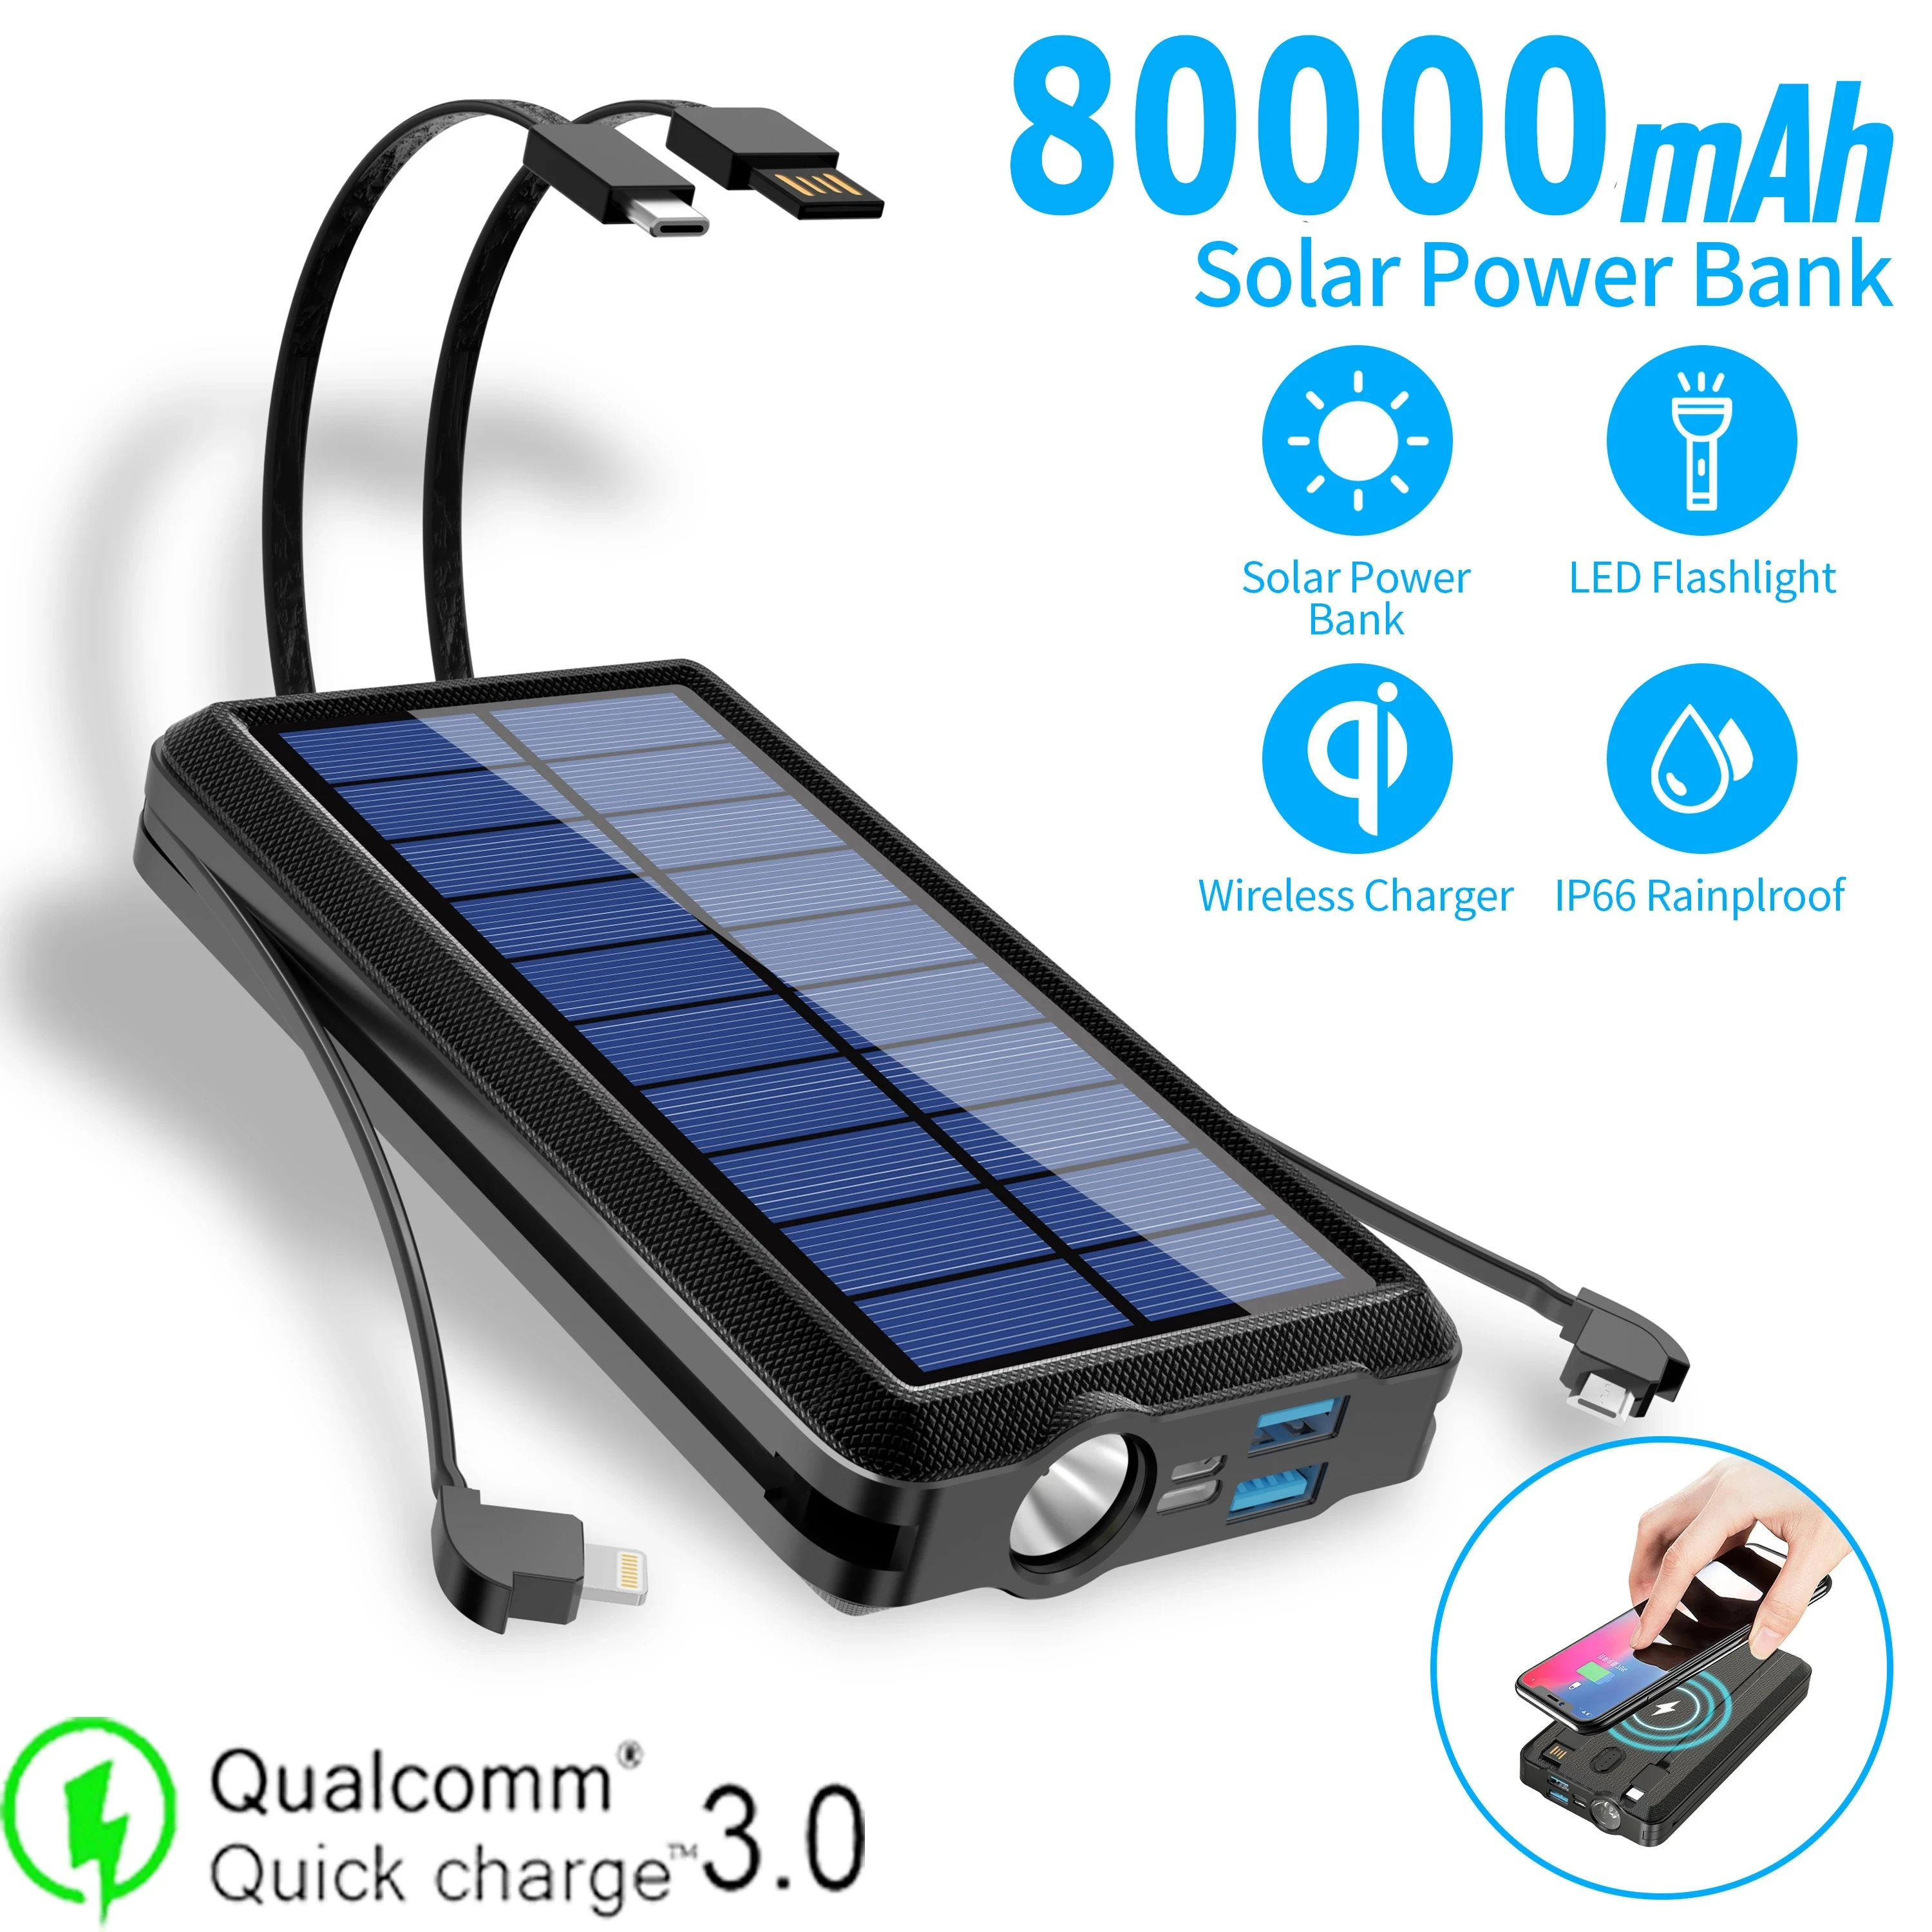 portable cell phone charger Top Solar Power Bank 5000mAh Waterproof Case Kits Dual USB Smartphone Battery Charger External Box Flashlight Powerbank for i13 wireless power bank